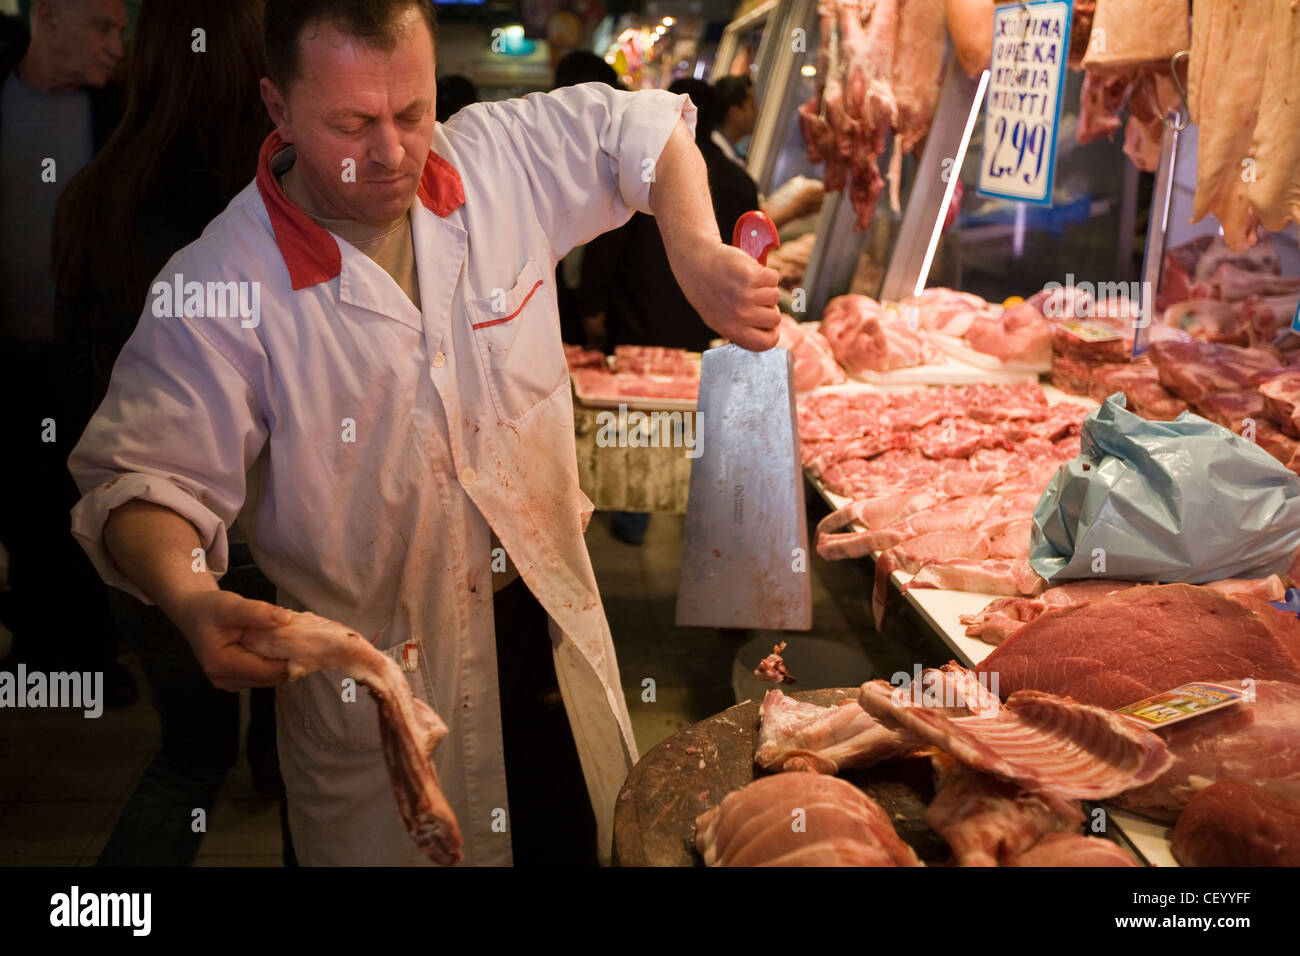 A butchers chops a carcass of meat in the Athens Central Market on Athinas Street. Athens, Greece Stock Photo